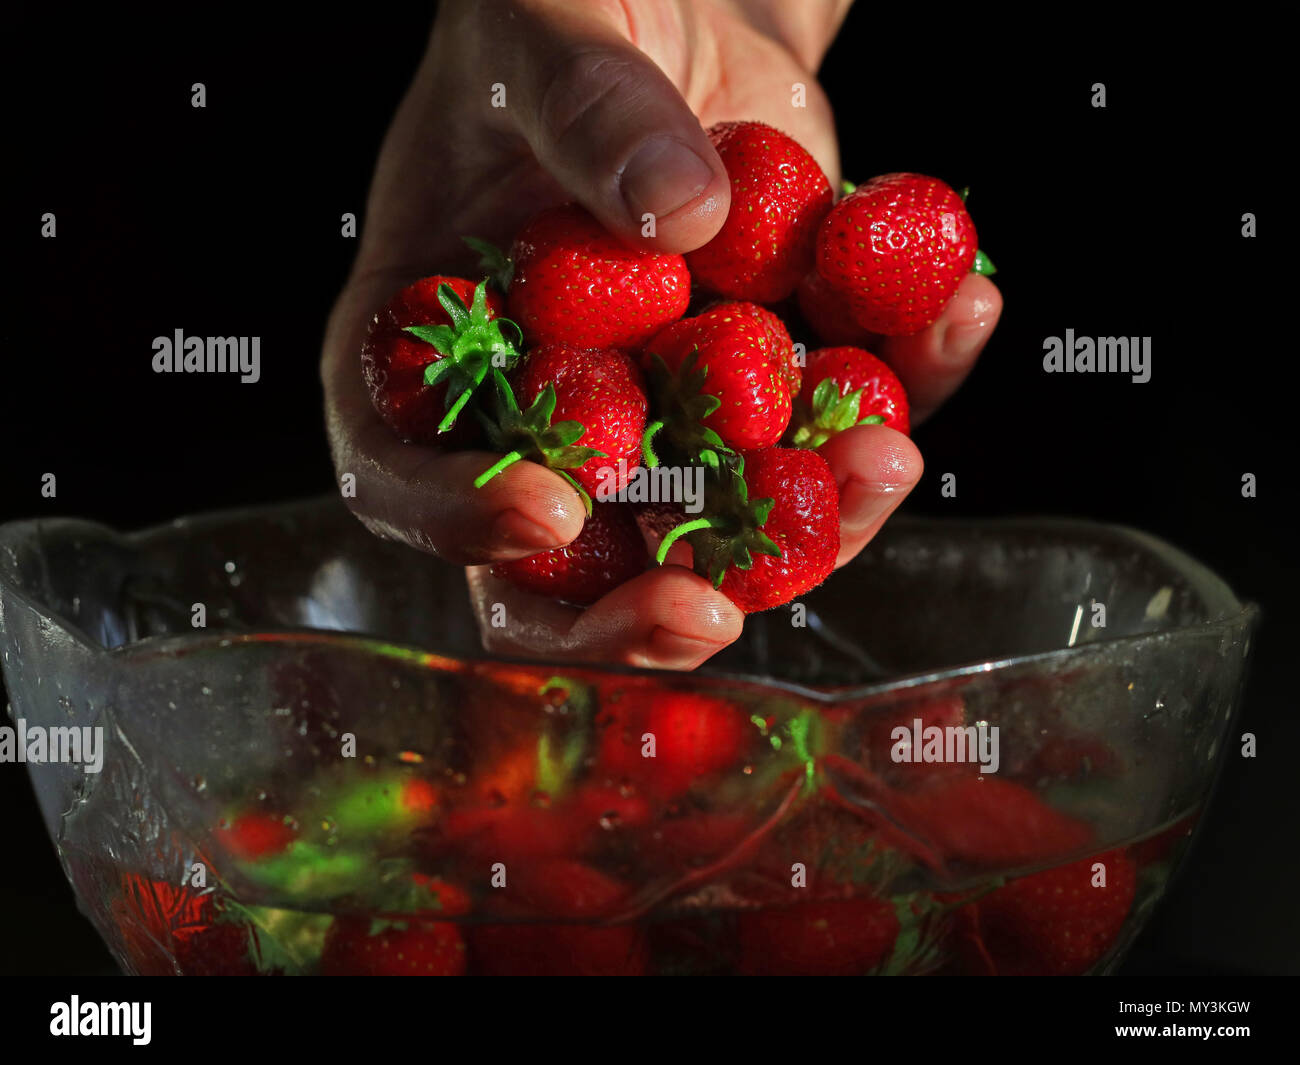 freshly washed strawberries are kept in hand over a bowl on dark background Stock Photo